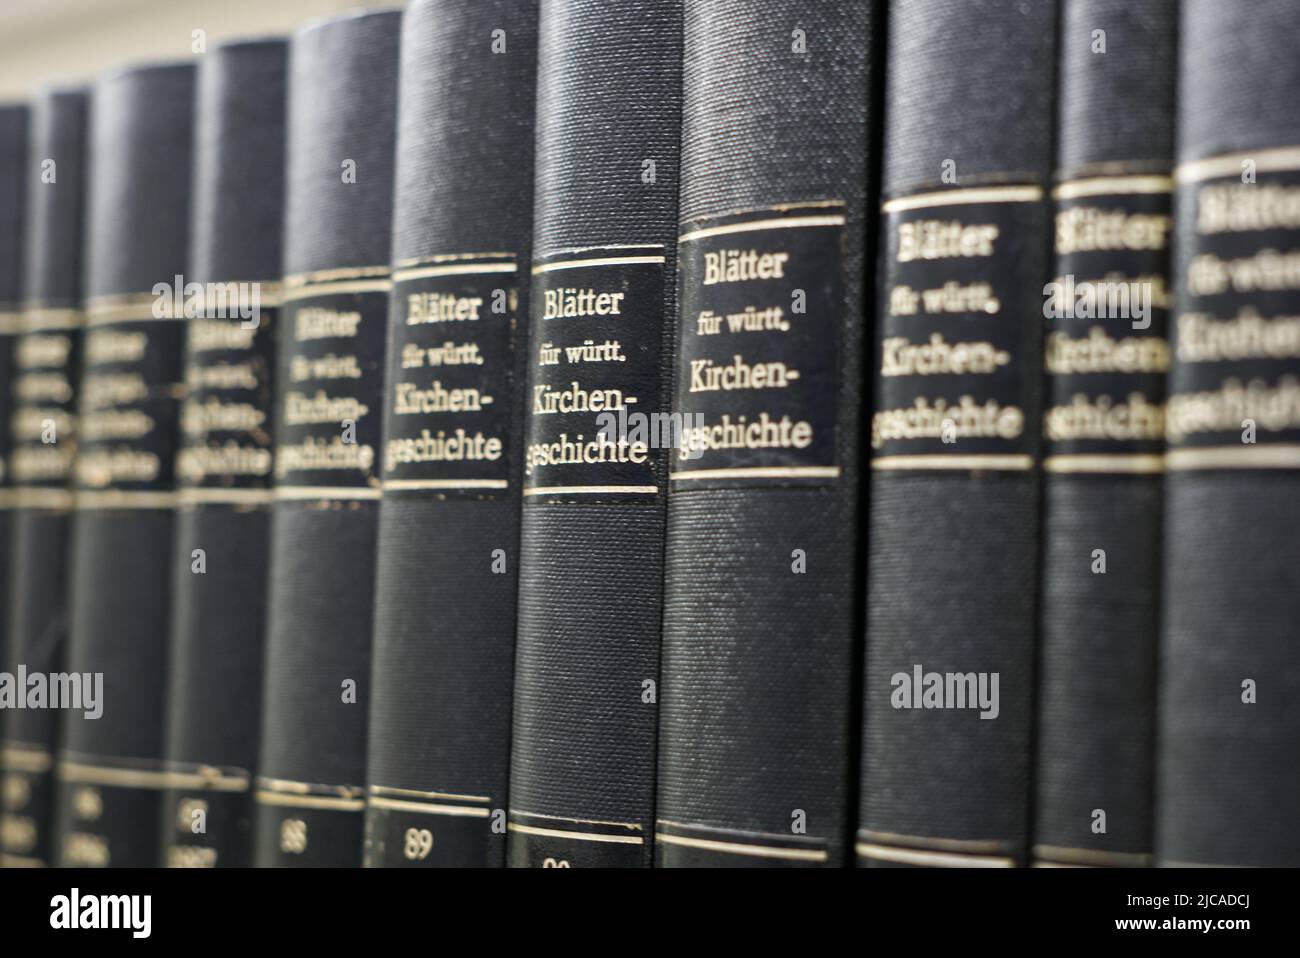 Black book spine in a row Stock Photo